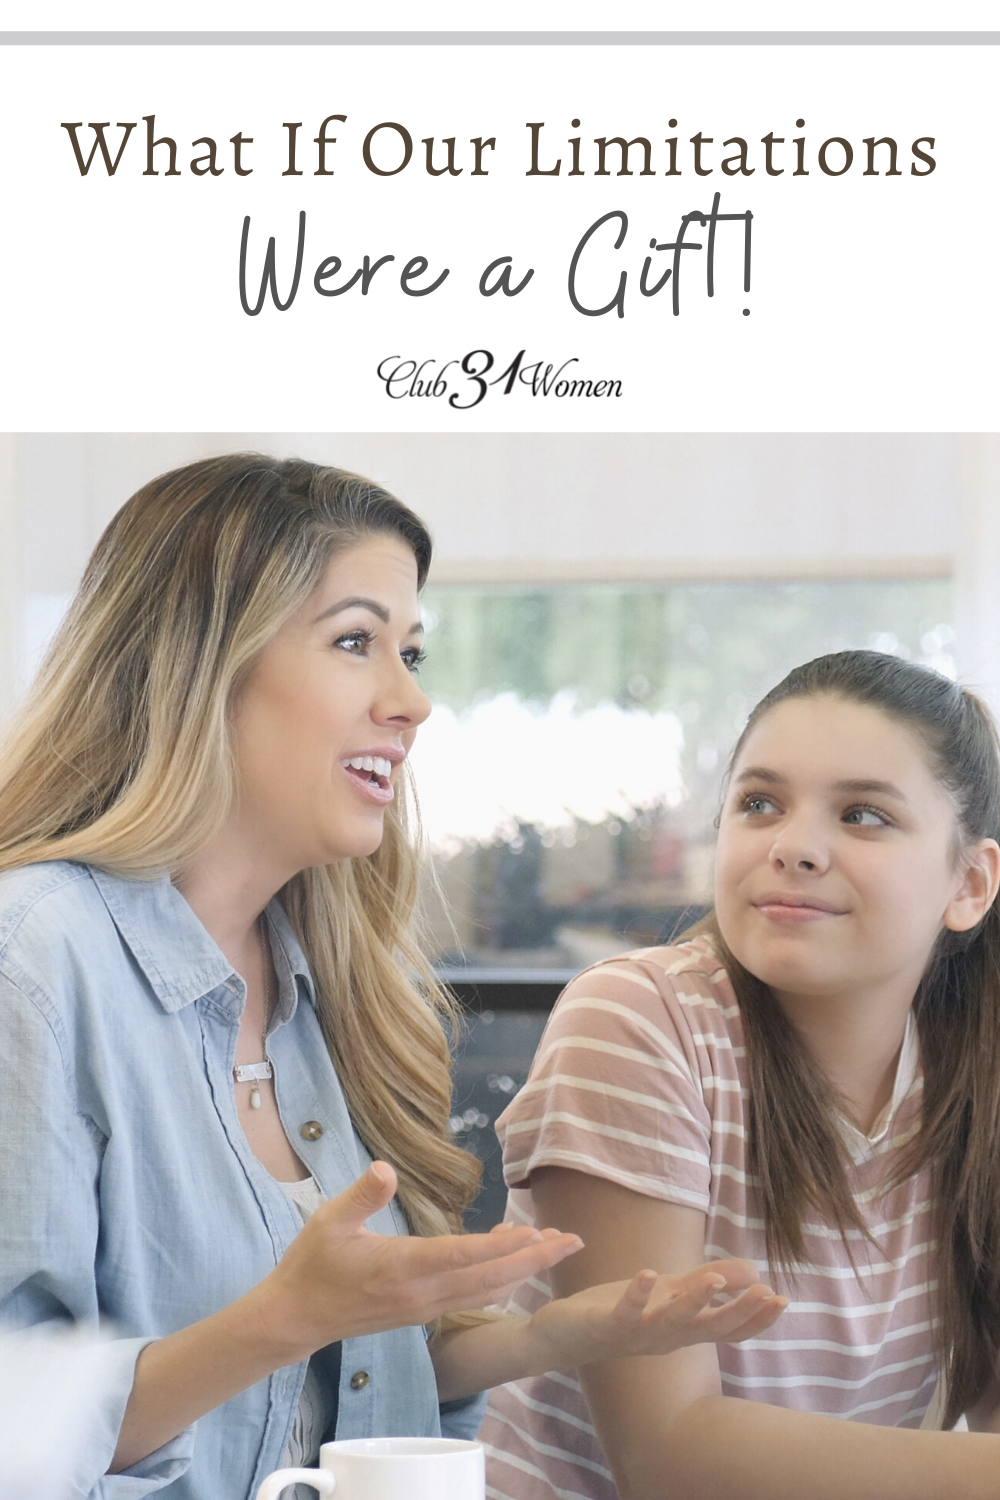 We believe doing more means being strong. But what if our limitations are actually a gift God gives so we can lean into Him even more? via @Club31Women